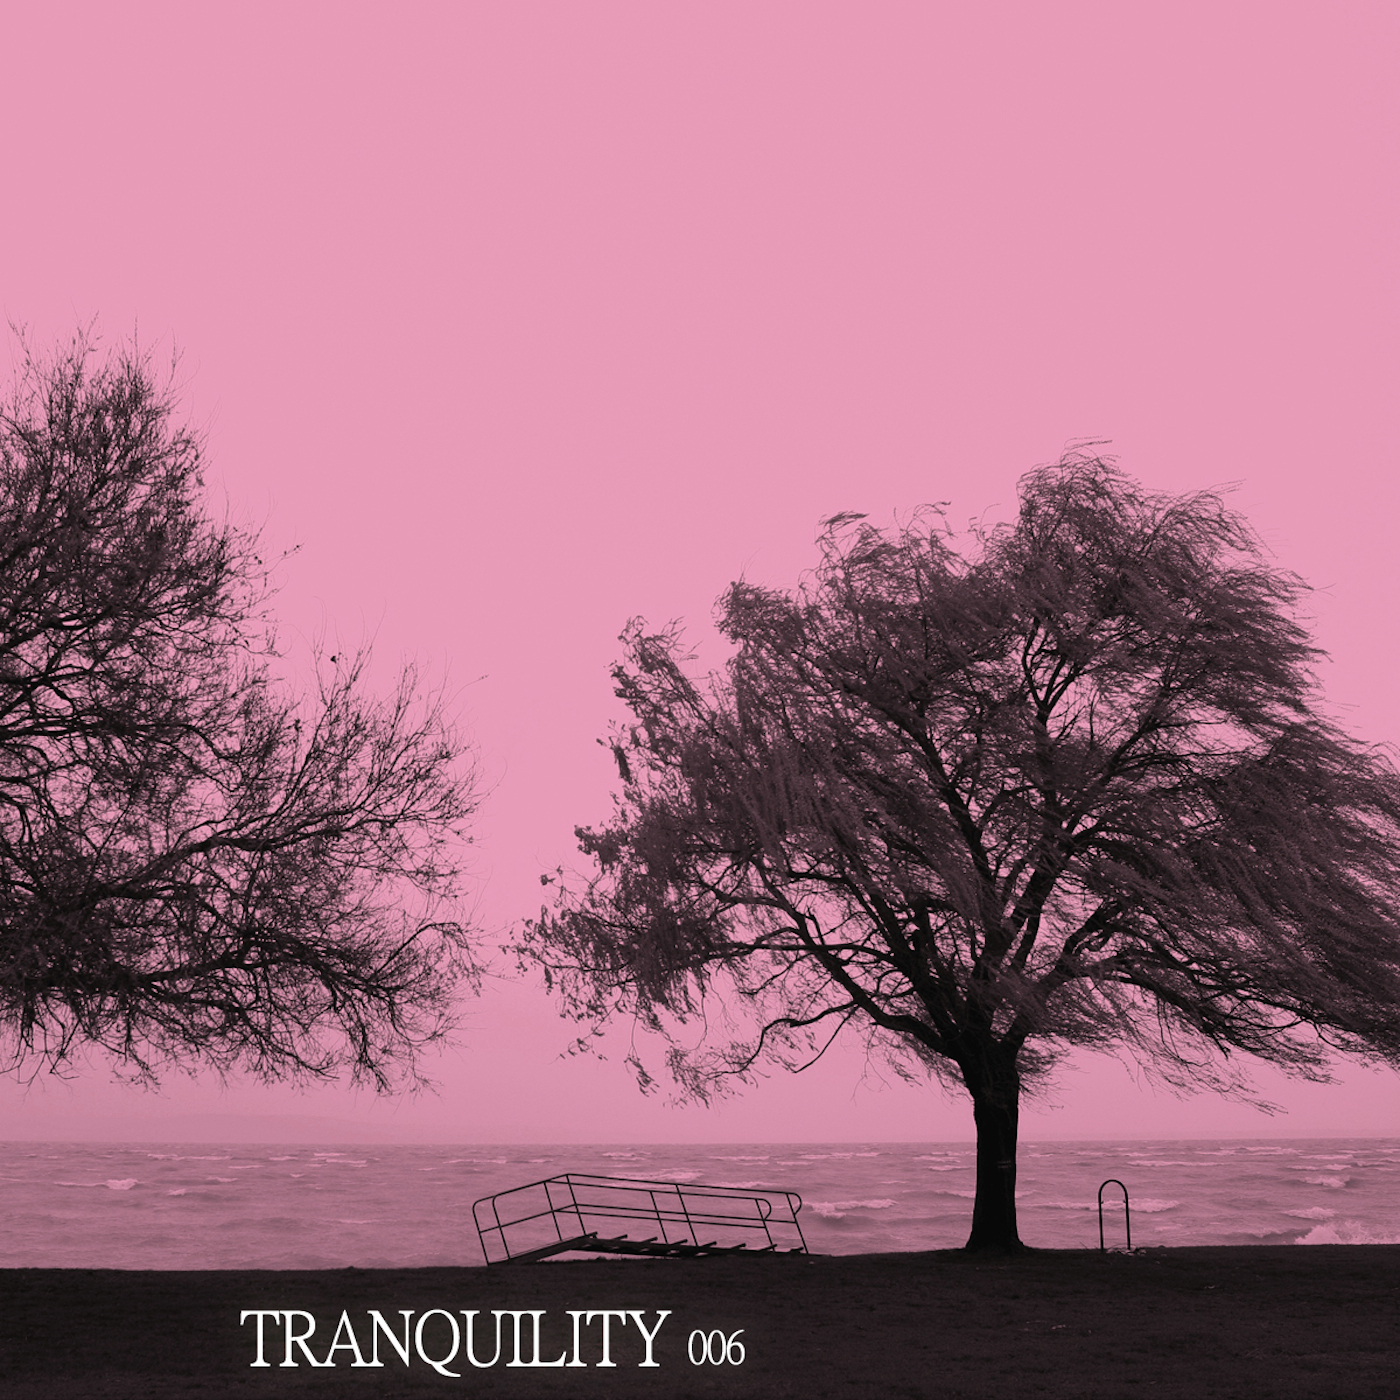 Tranquility 006